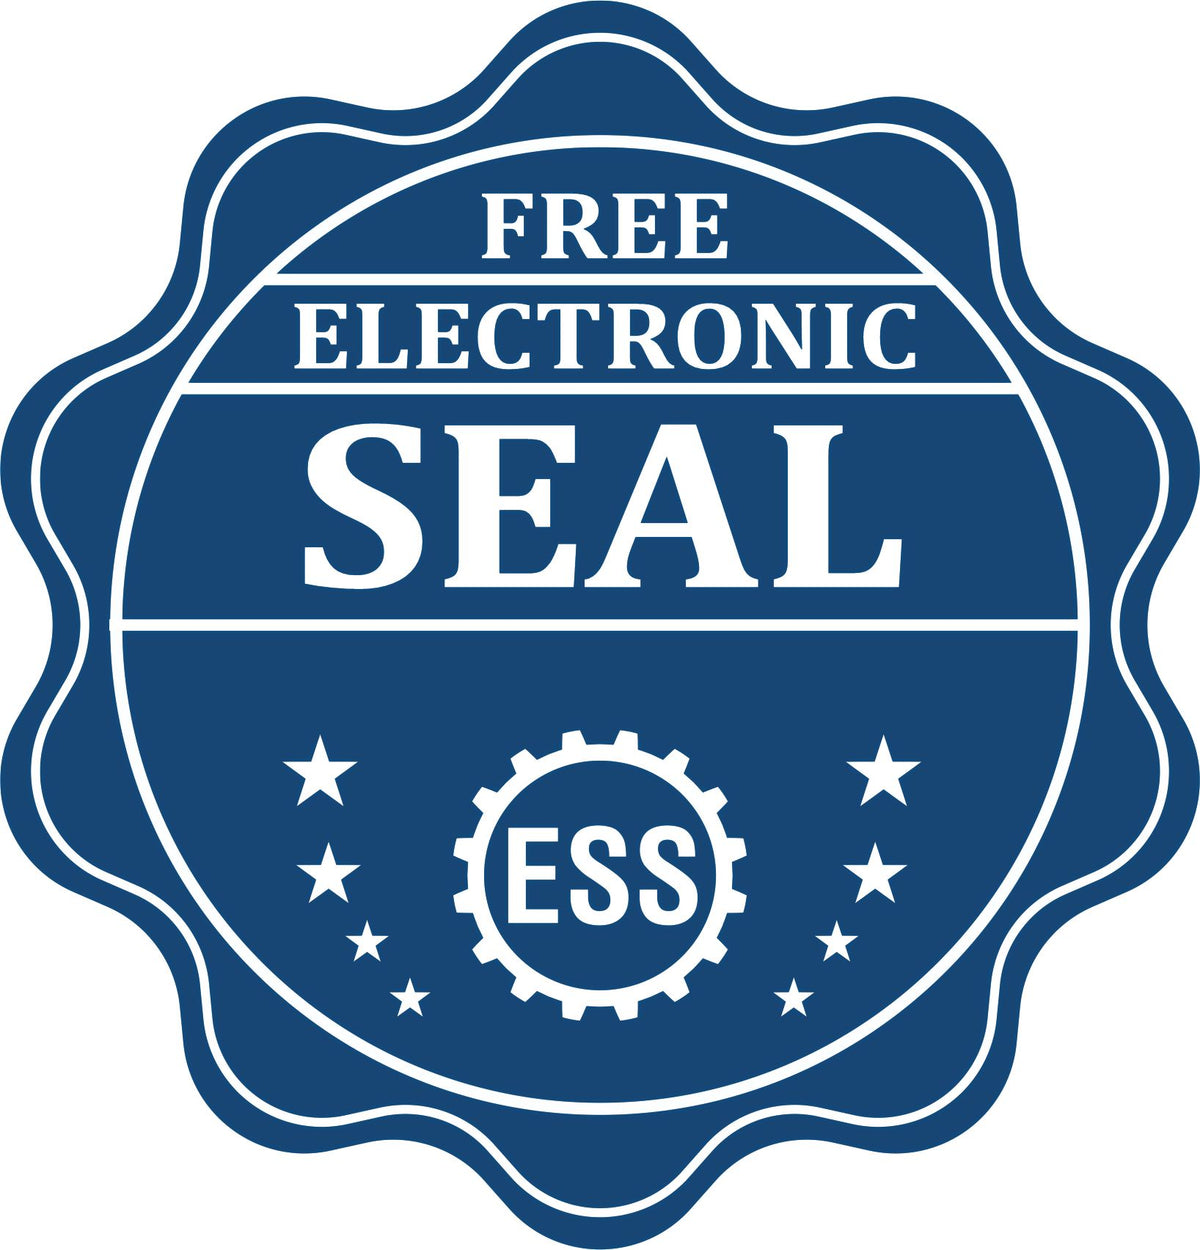 A badge showing a free electronic seal for the Soft Wyoming Professional Geologist Seal with stars and the ESS gear on the emblem.